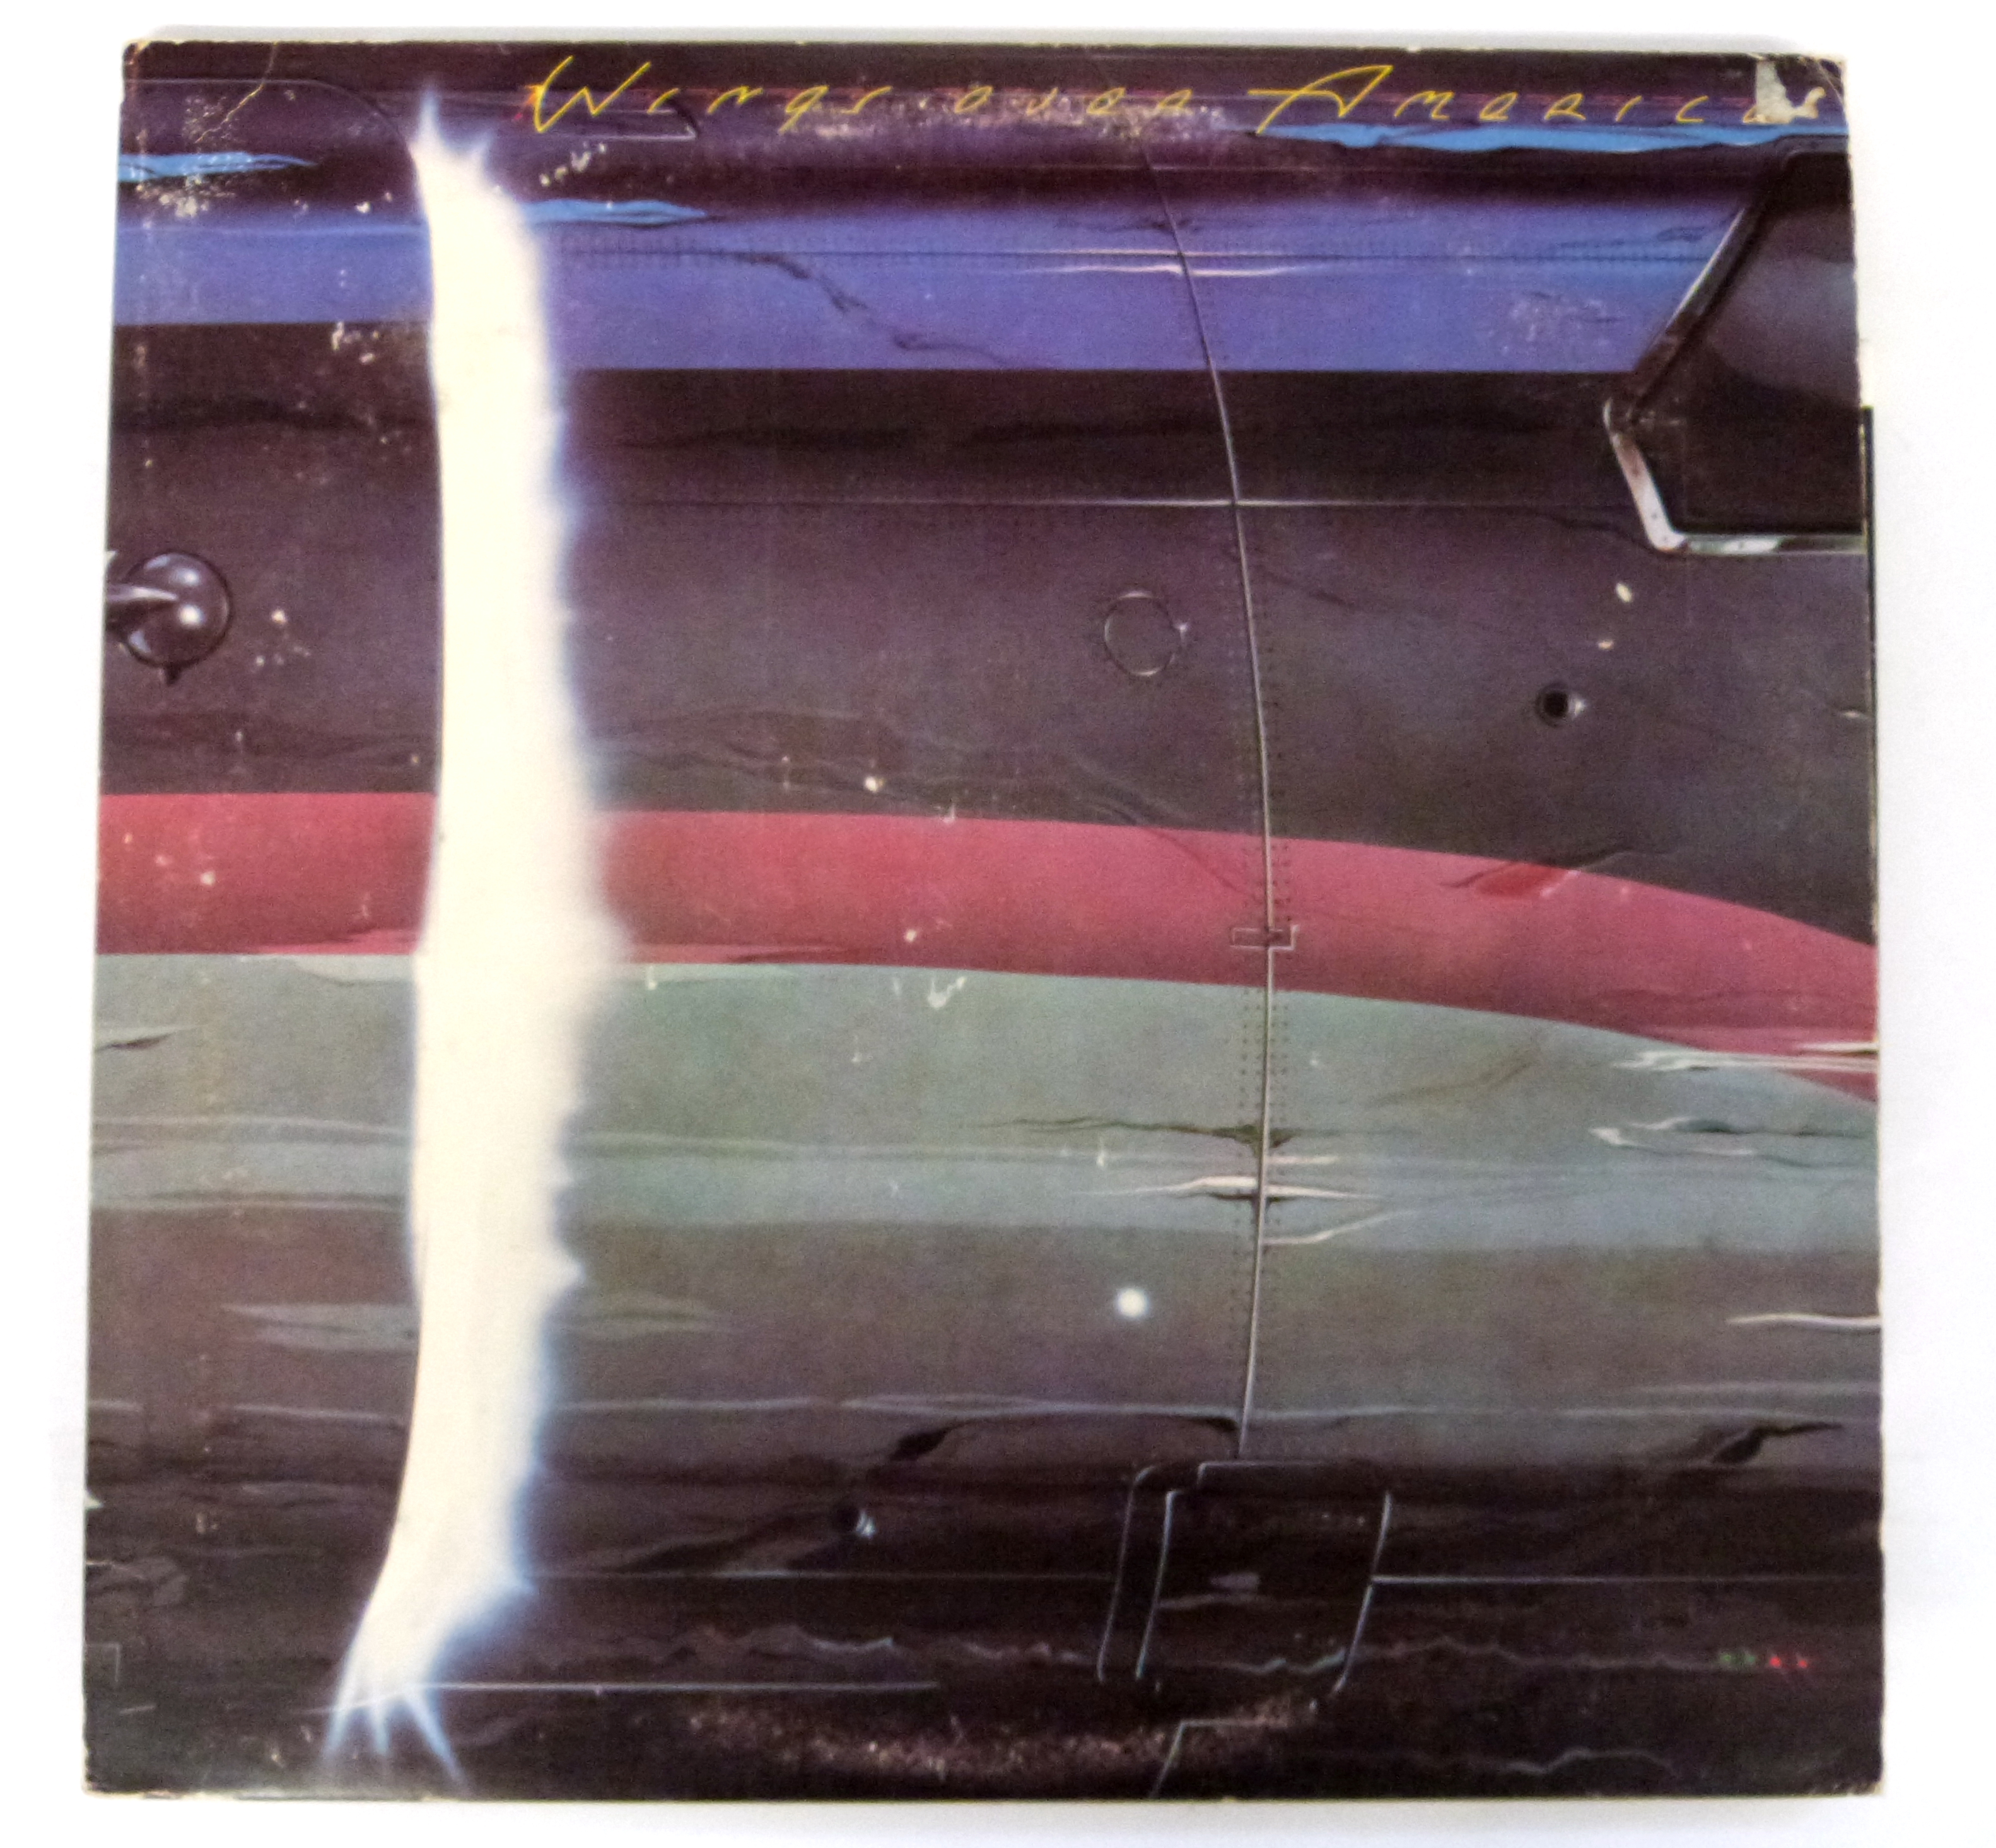 Wings Over America triple Live LP. Condition: VG+